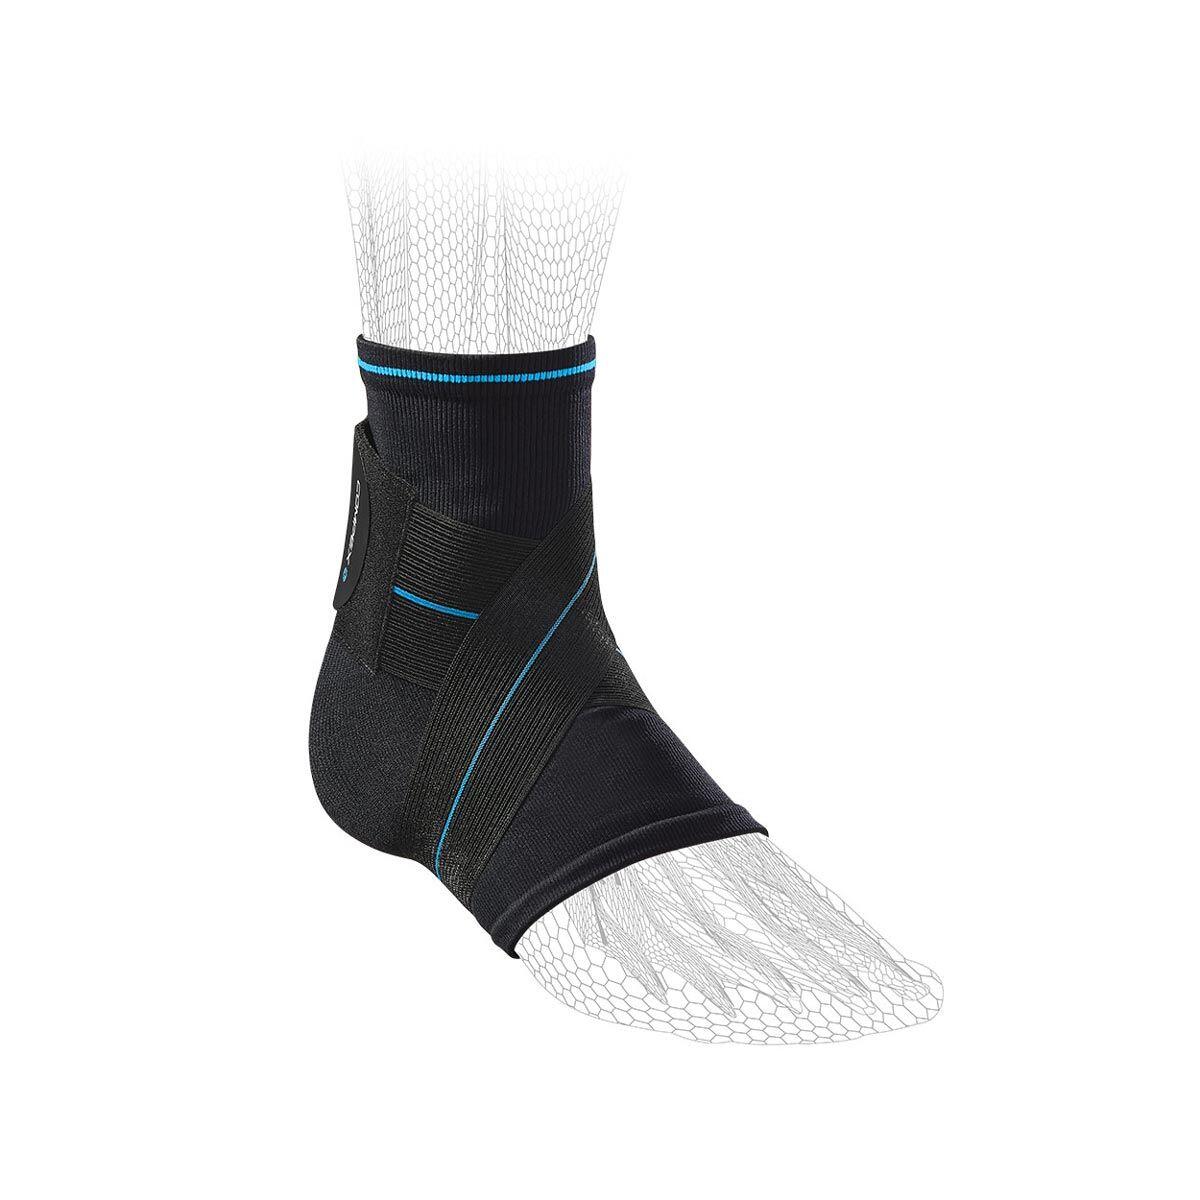 COMPEX COMPEX ACTIV’ ANKLE+ compression support